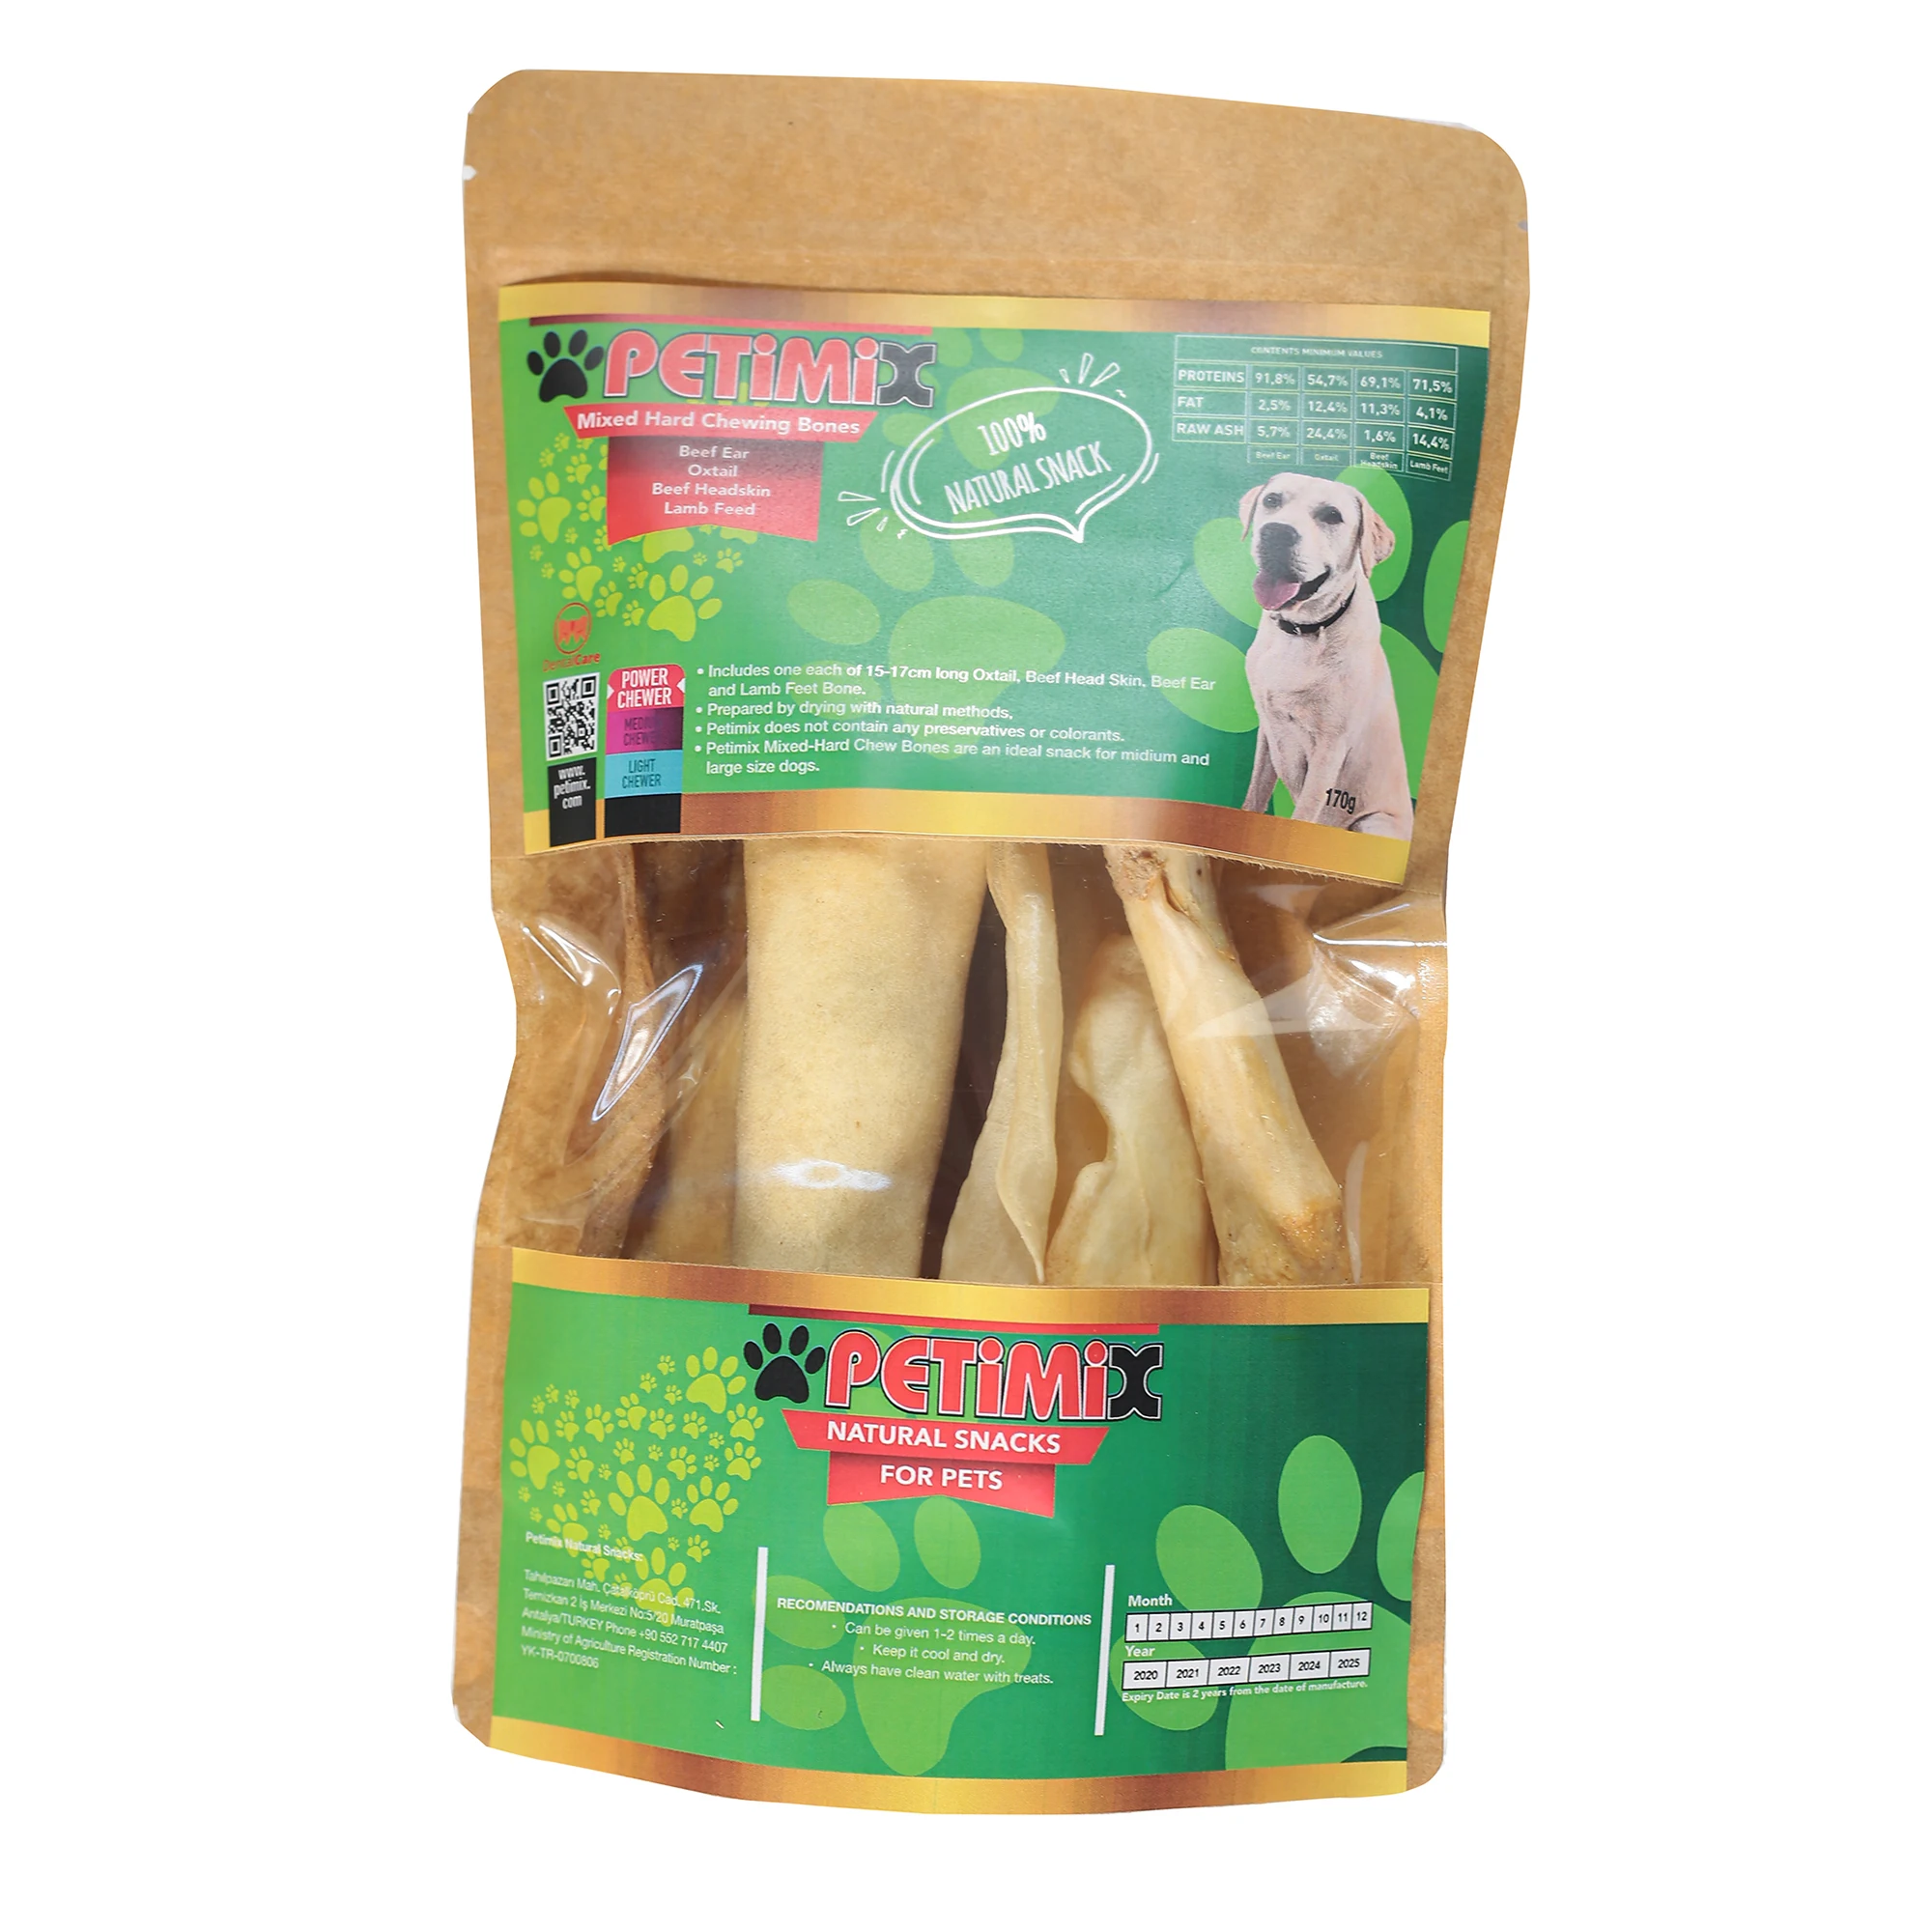 

Petimix Mixed Hard Chewing Bones Natural Snacks for Pets Dog Treats Beef Ear Beef Headskin OxTail Lamb Feet Dental Care 170g